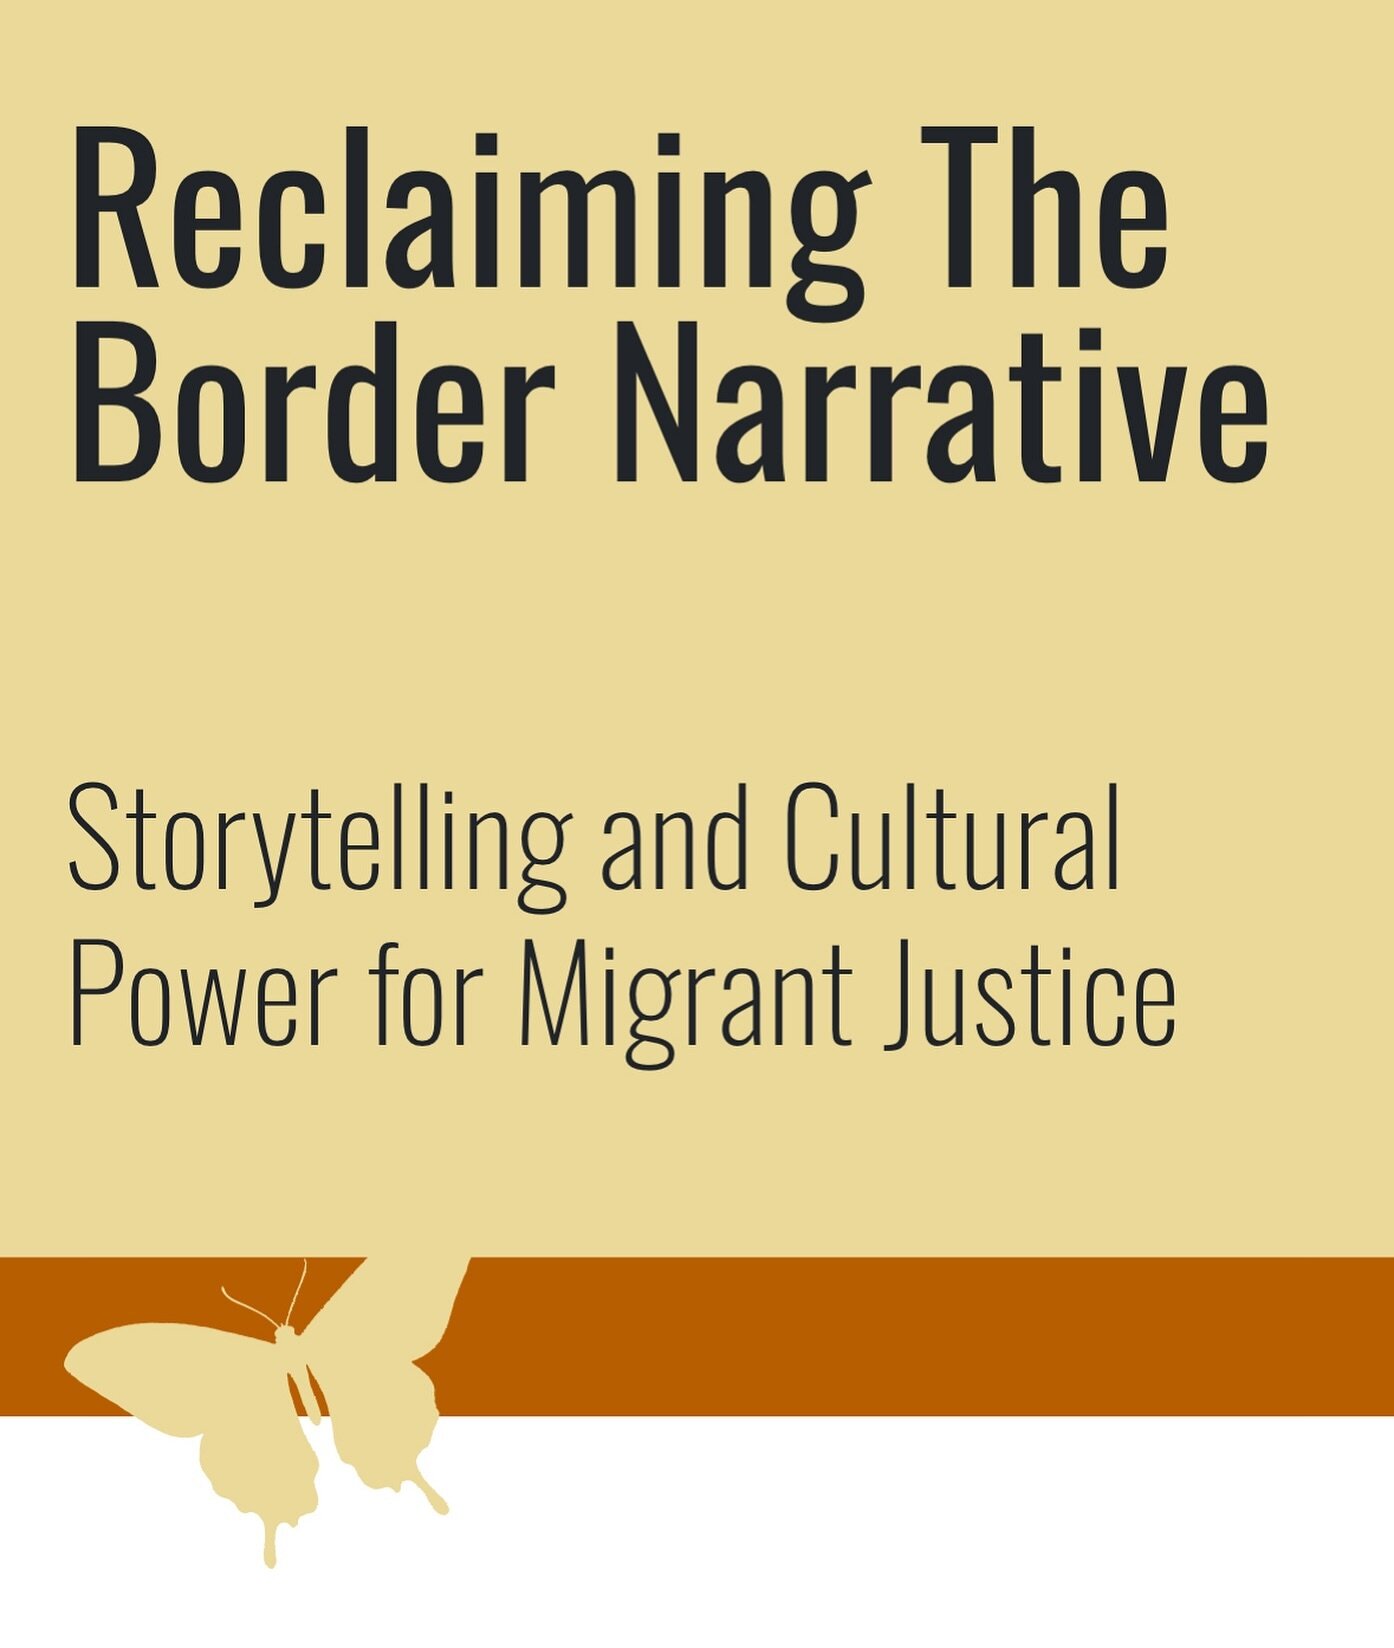 Currently engrossed in the Reclaiming the Border Narrative Archive Launch in Tucson and discovering the stories of a diverse community of contributors, who are all working to pull the rug out of the narrative purported by mainstream media revolving i